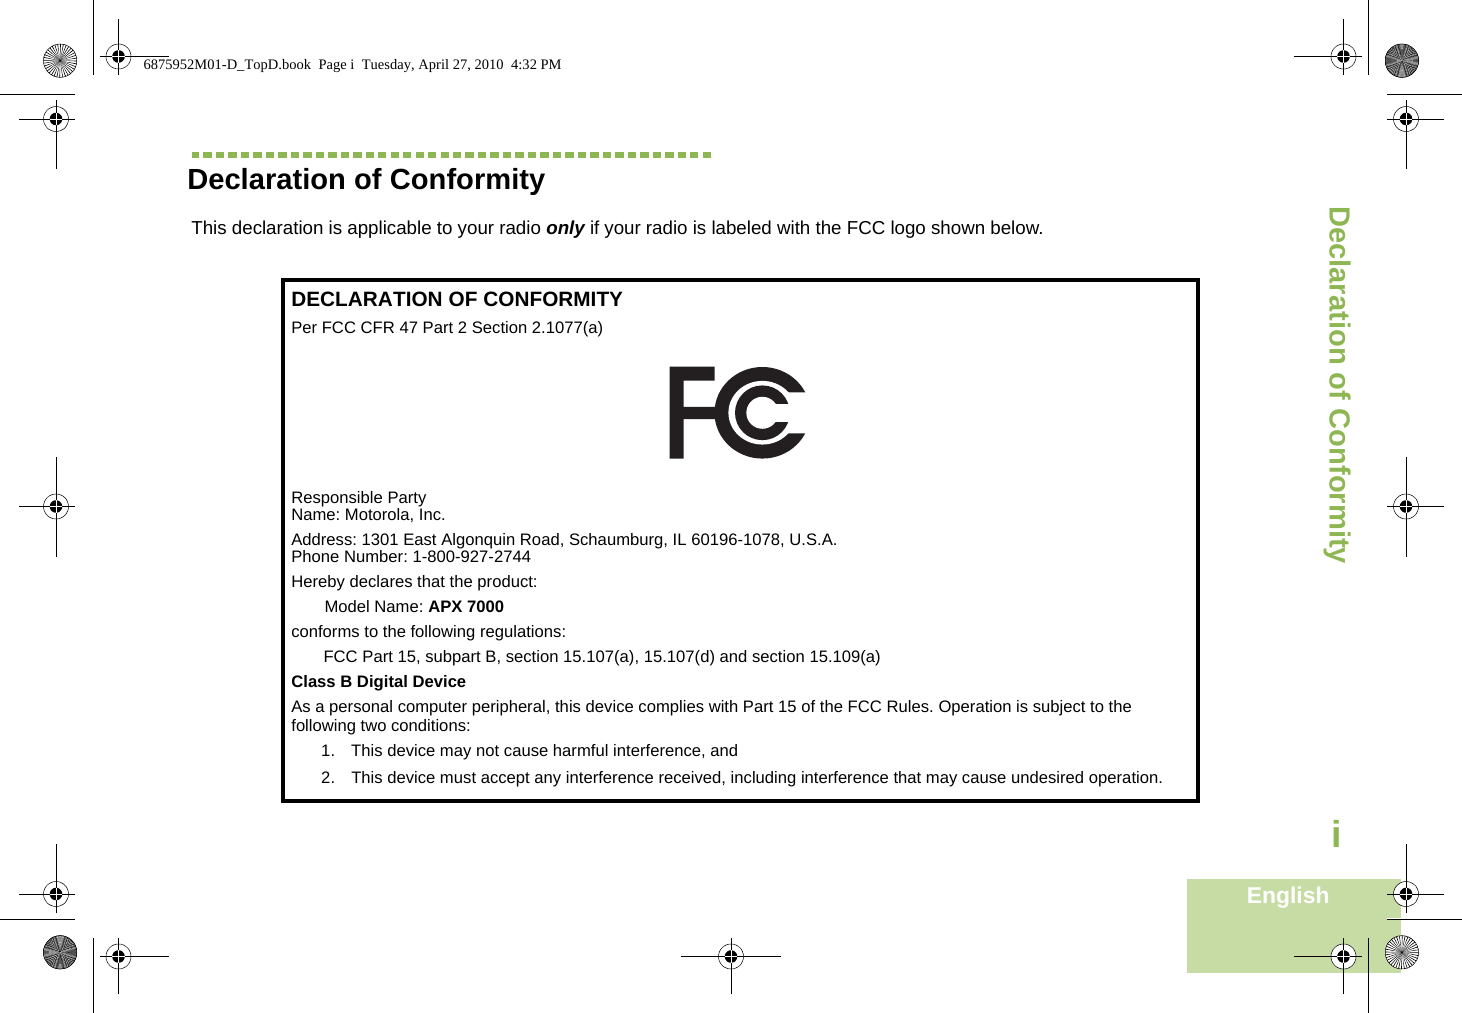 Declaration of ConformityEnglishiDeclaration of ConformityThis declaration is applicable to your radio only if your radio is labeled with the FCC logo shown below.DECLARATION OF CONFORMITYPer FCC CFR 47 Part 2 Section 2.1077(a)Responsible Party Name: Motorola, Inc.Address: 1301 East Algonquin Road, Schaumburg, IL 60196-1078, U.S.A.Phone Number: 1-800-927-2744Hereby declares that the product:Model Name: APX 7000conforms to the following regulations:FCC Part 15, subpart B, section 15.107(a), 15.107(d) and section 15.109(a)Class B Digital DeviceAs a personal computer peripheral, this device complies with Part 15 of the FCC Rules. Operation is subject to the following two conditions:1. This device may not cause harmful interference, and 2. This device must accept any interference received, including interference that may cause undesired operation.6875952M01-D_TopD.book  Page i  Tuesday, April 27, 2010  4:32 PM